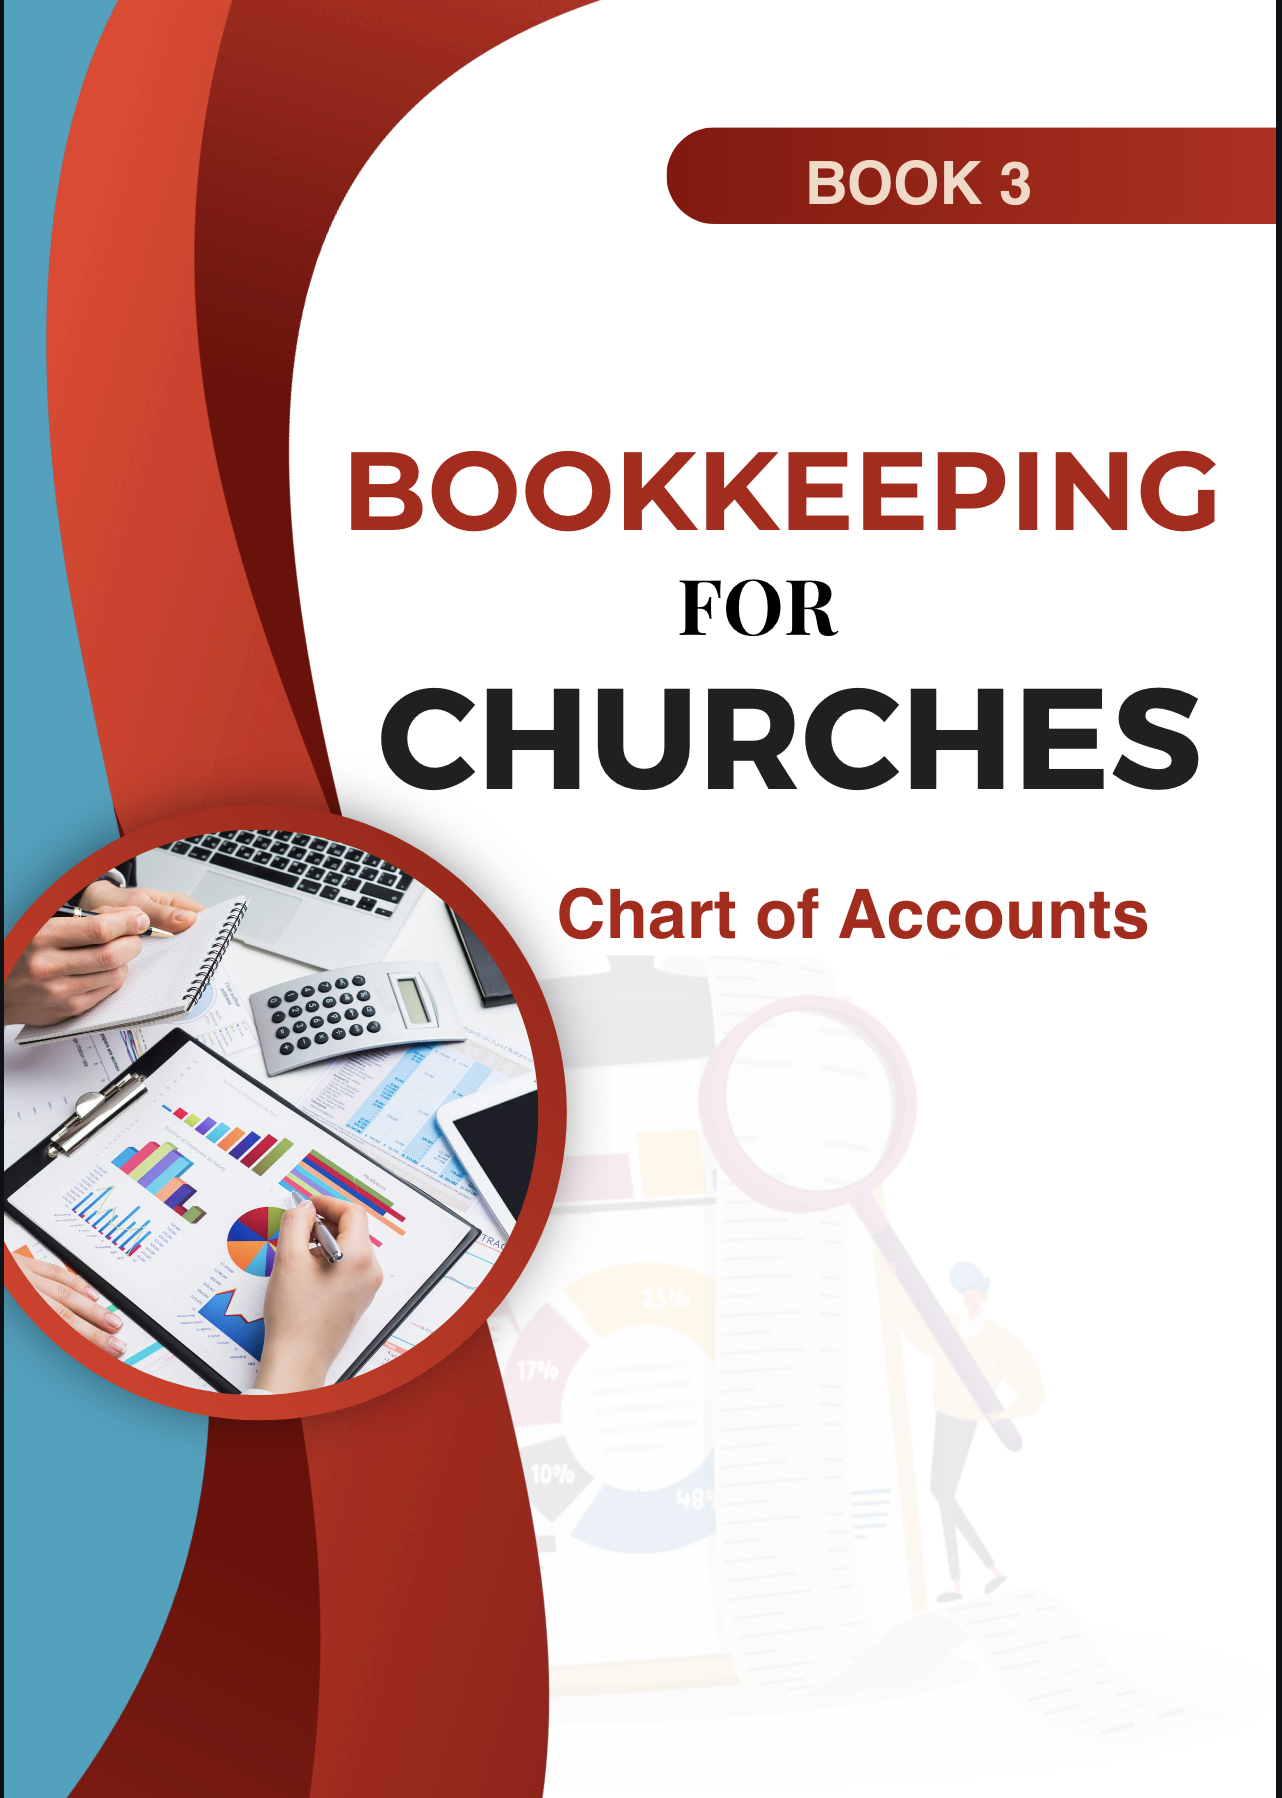 Bookkeeping for Churches on Chart of Accounts.